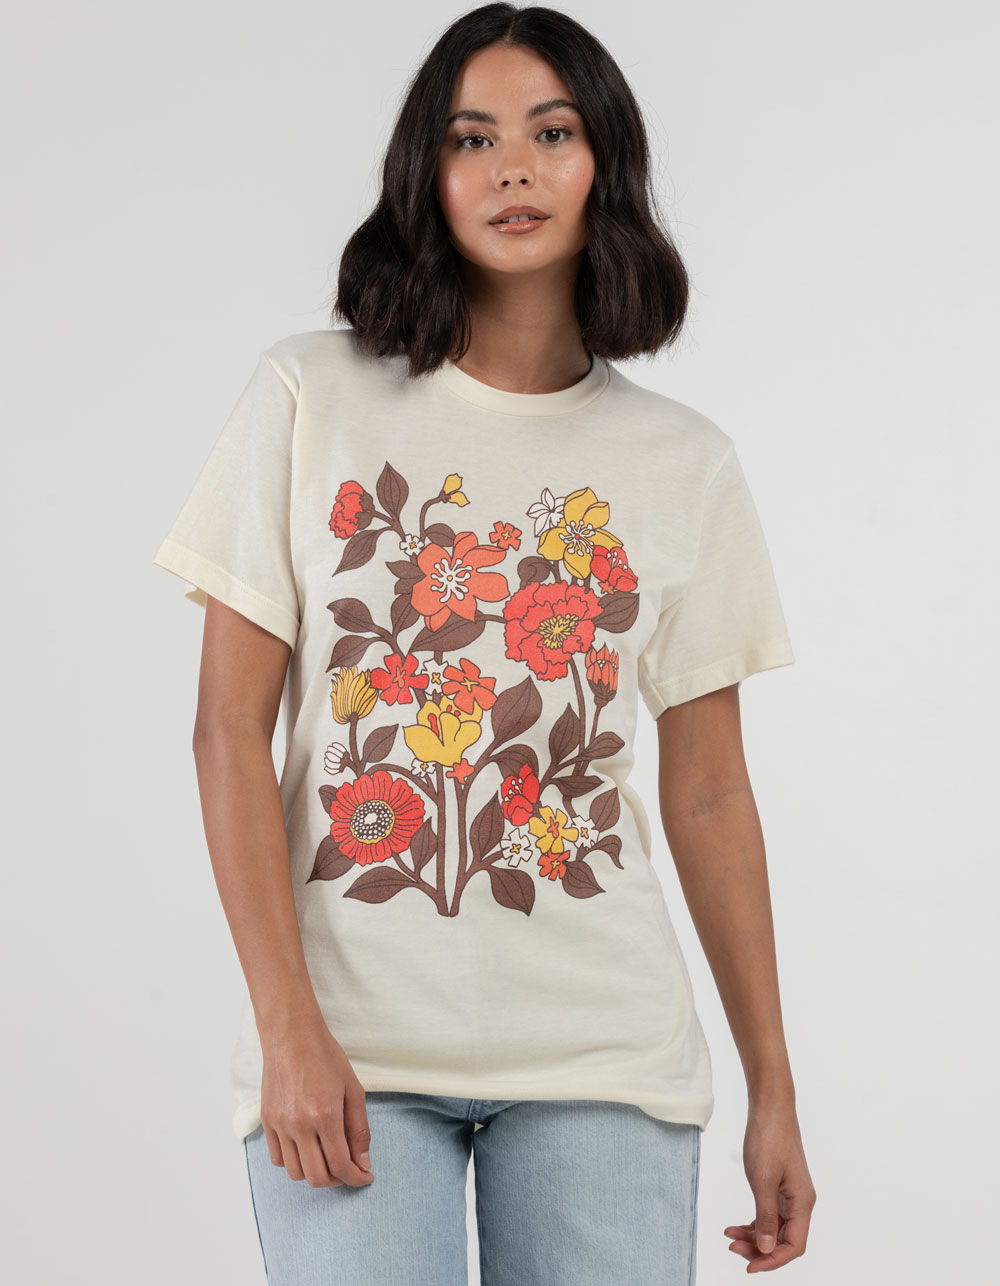 NATURE Retro Floral Unisex Tee - NATURAL | Tillys